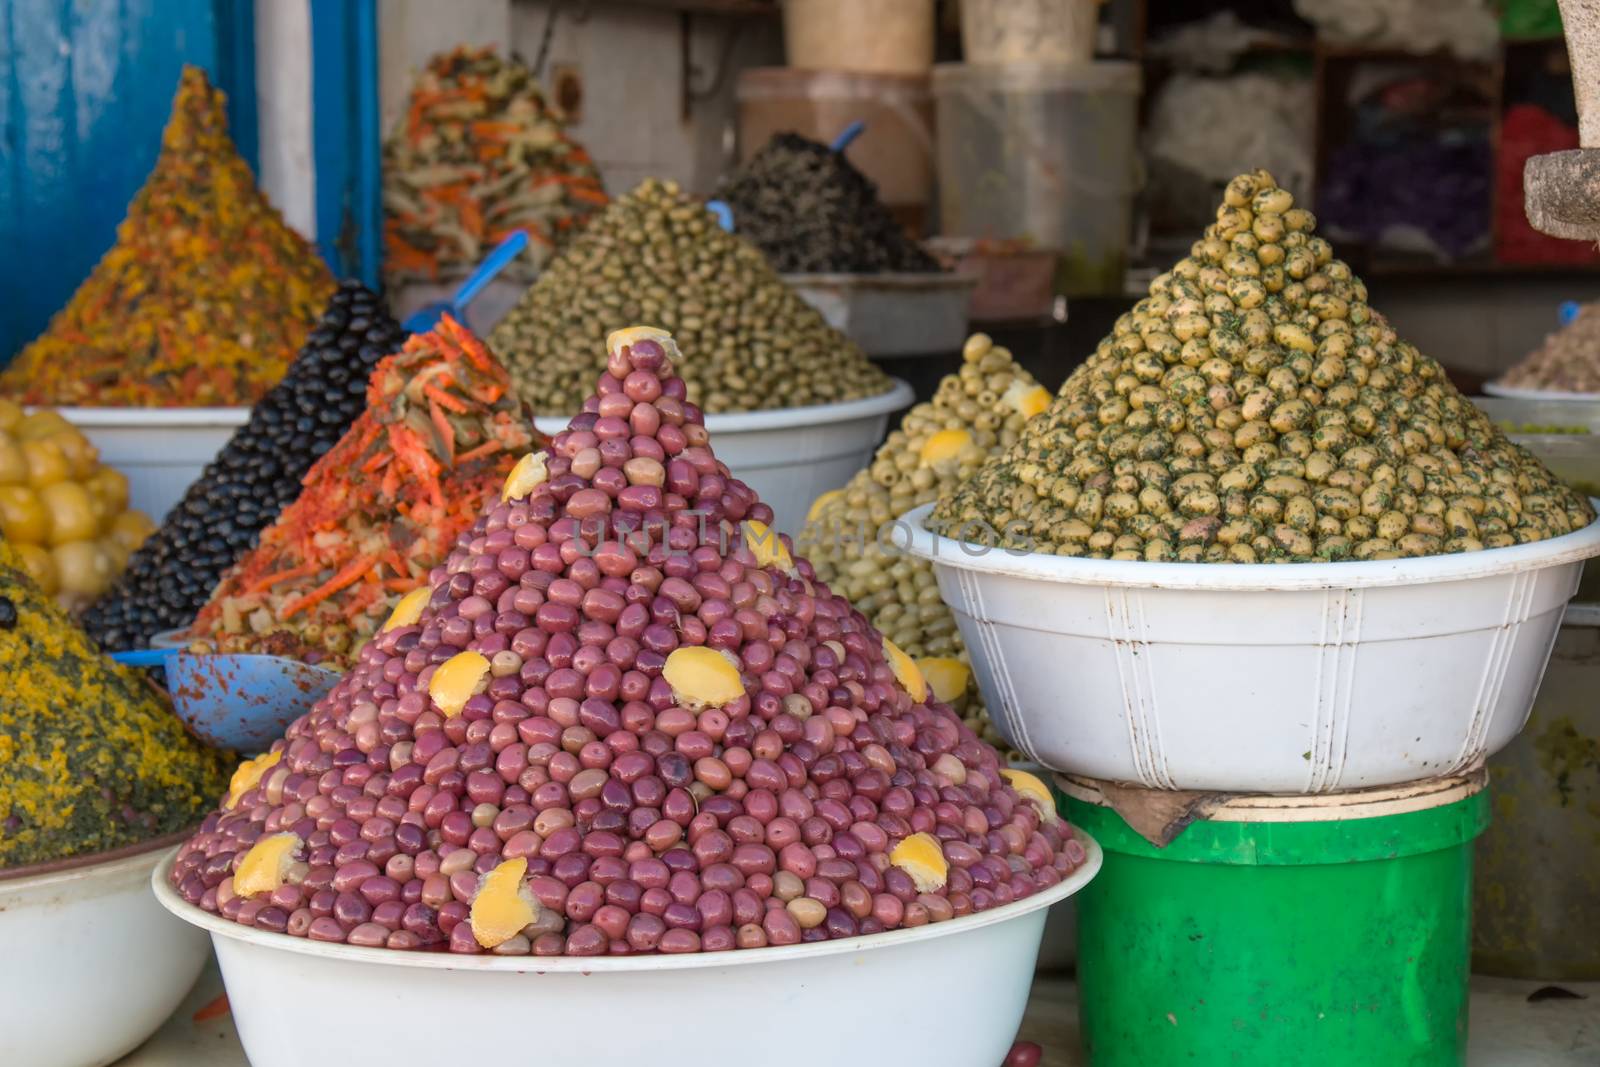 Shop with Olives, Morocco by YassminPhoto